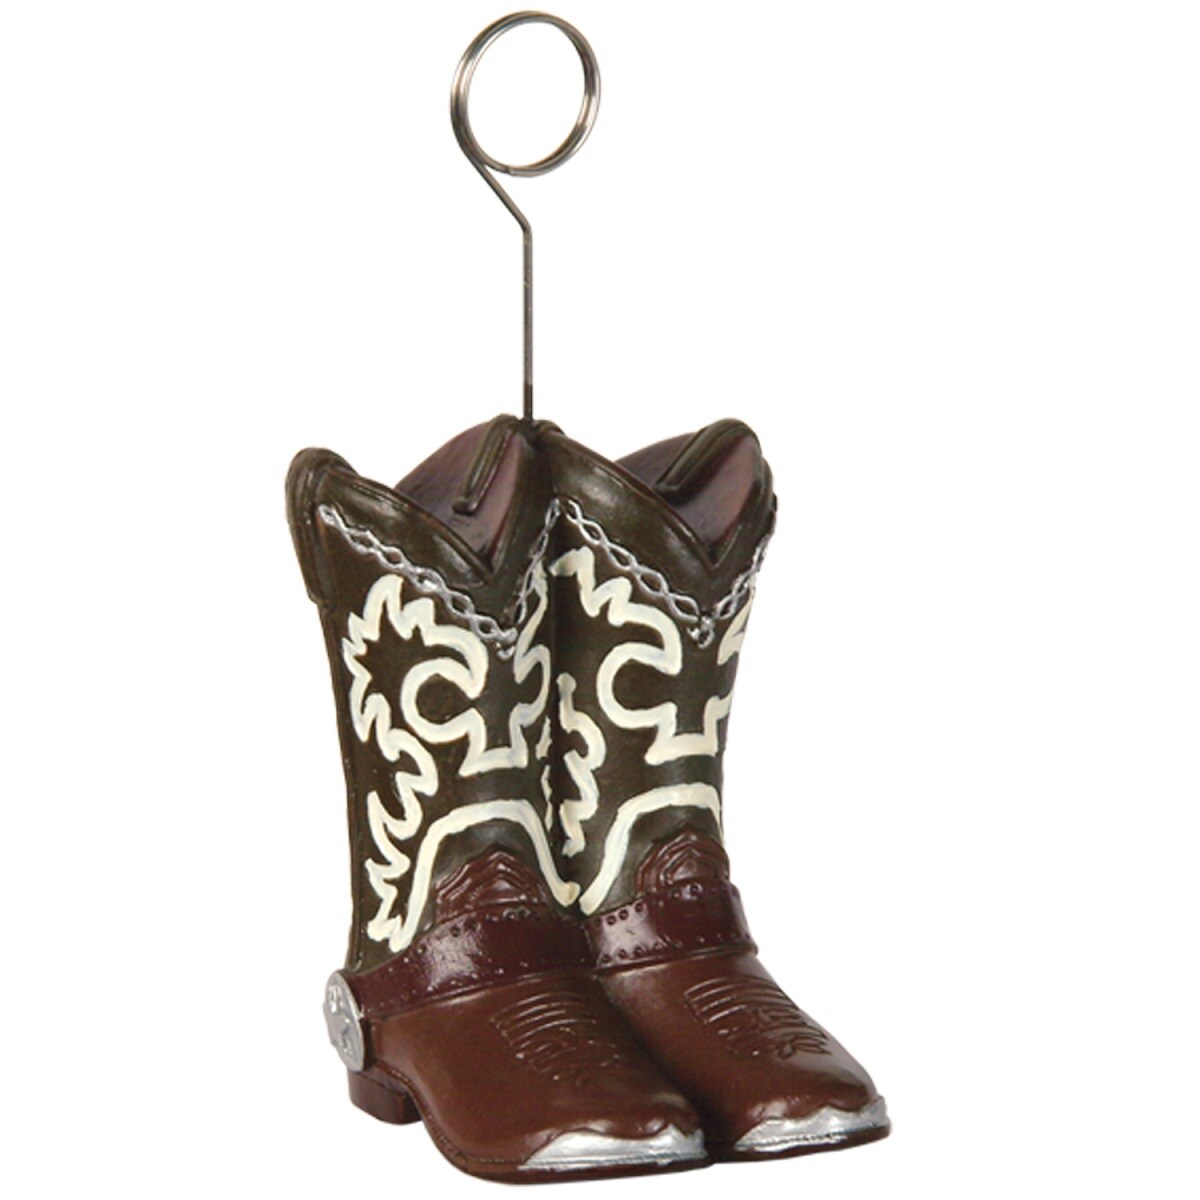 Beistle Pack of 6 Brown and Silver Western Cowboy Boots Photo or Balloon Holders 6oz.